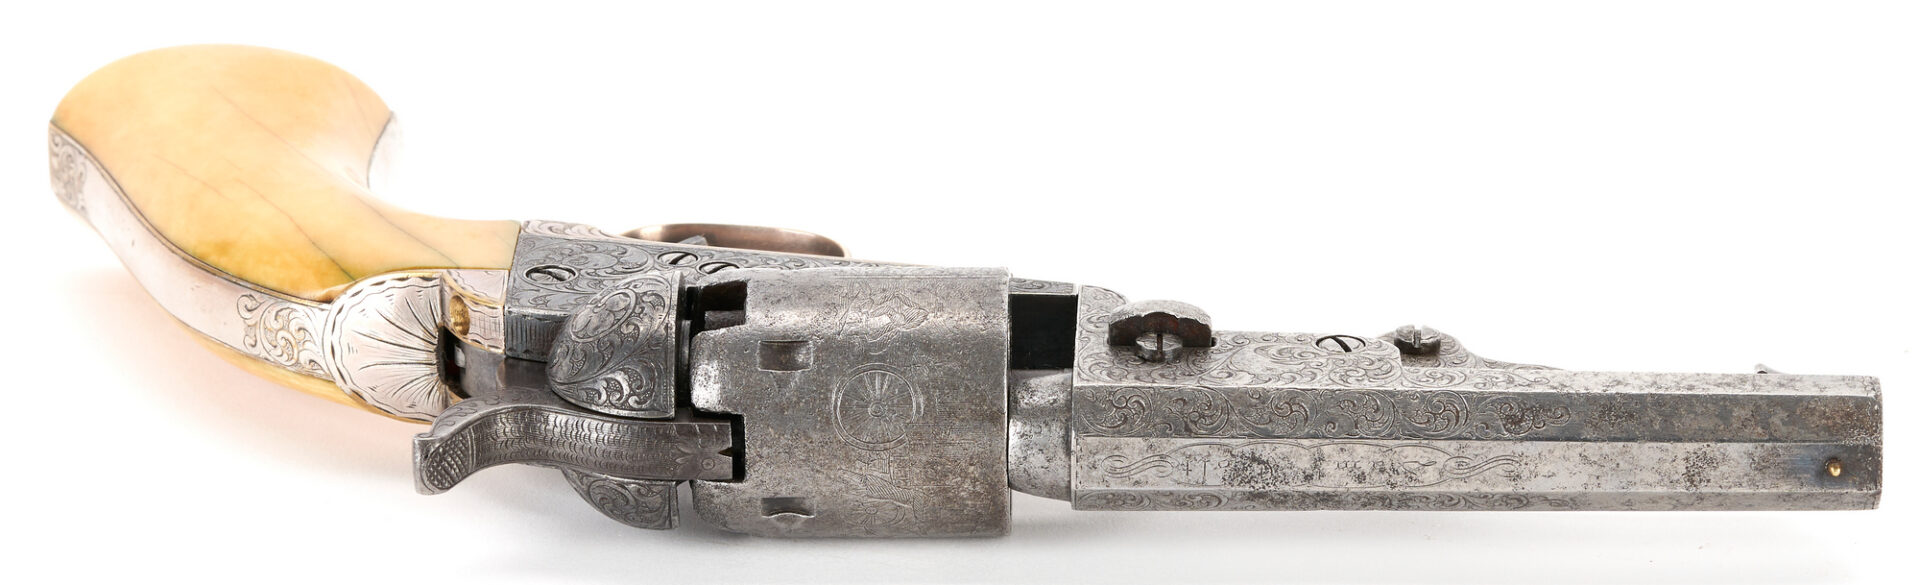 Lot 671: Gustave Young Factory Engraved Colt Model 1849 Pocket Revolver w/ Case, .31 cal., 3 items